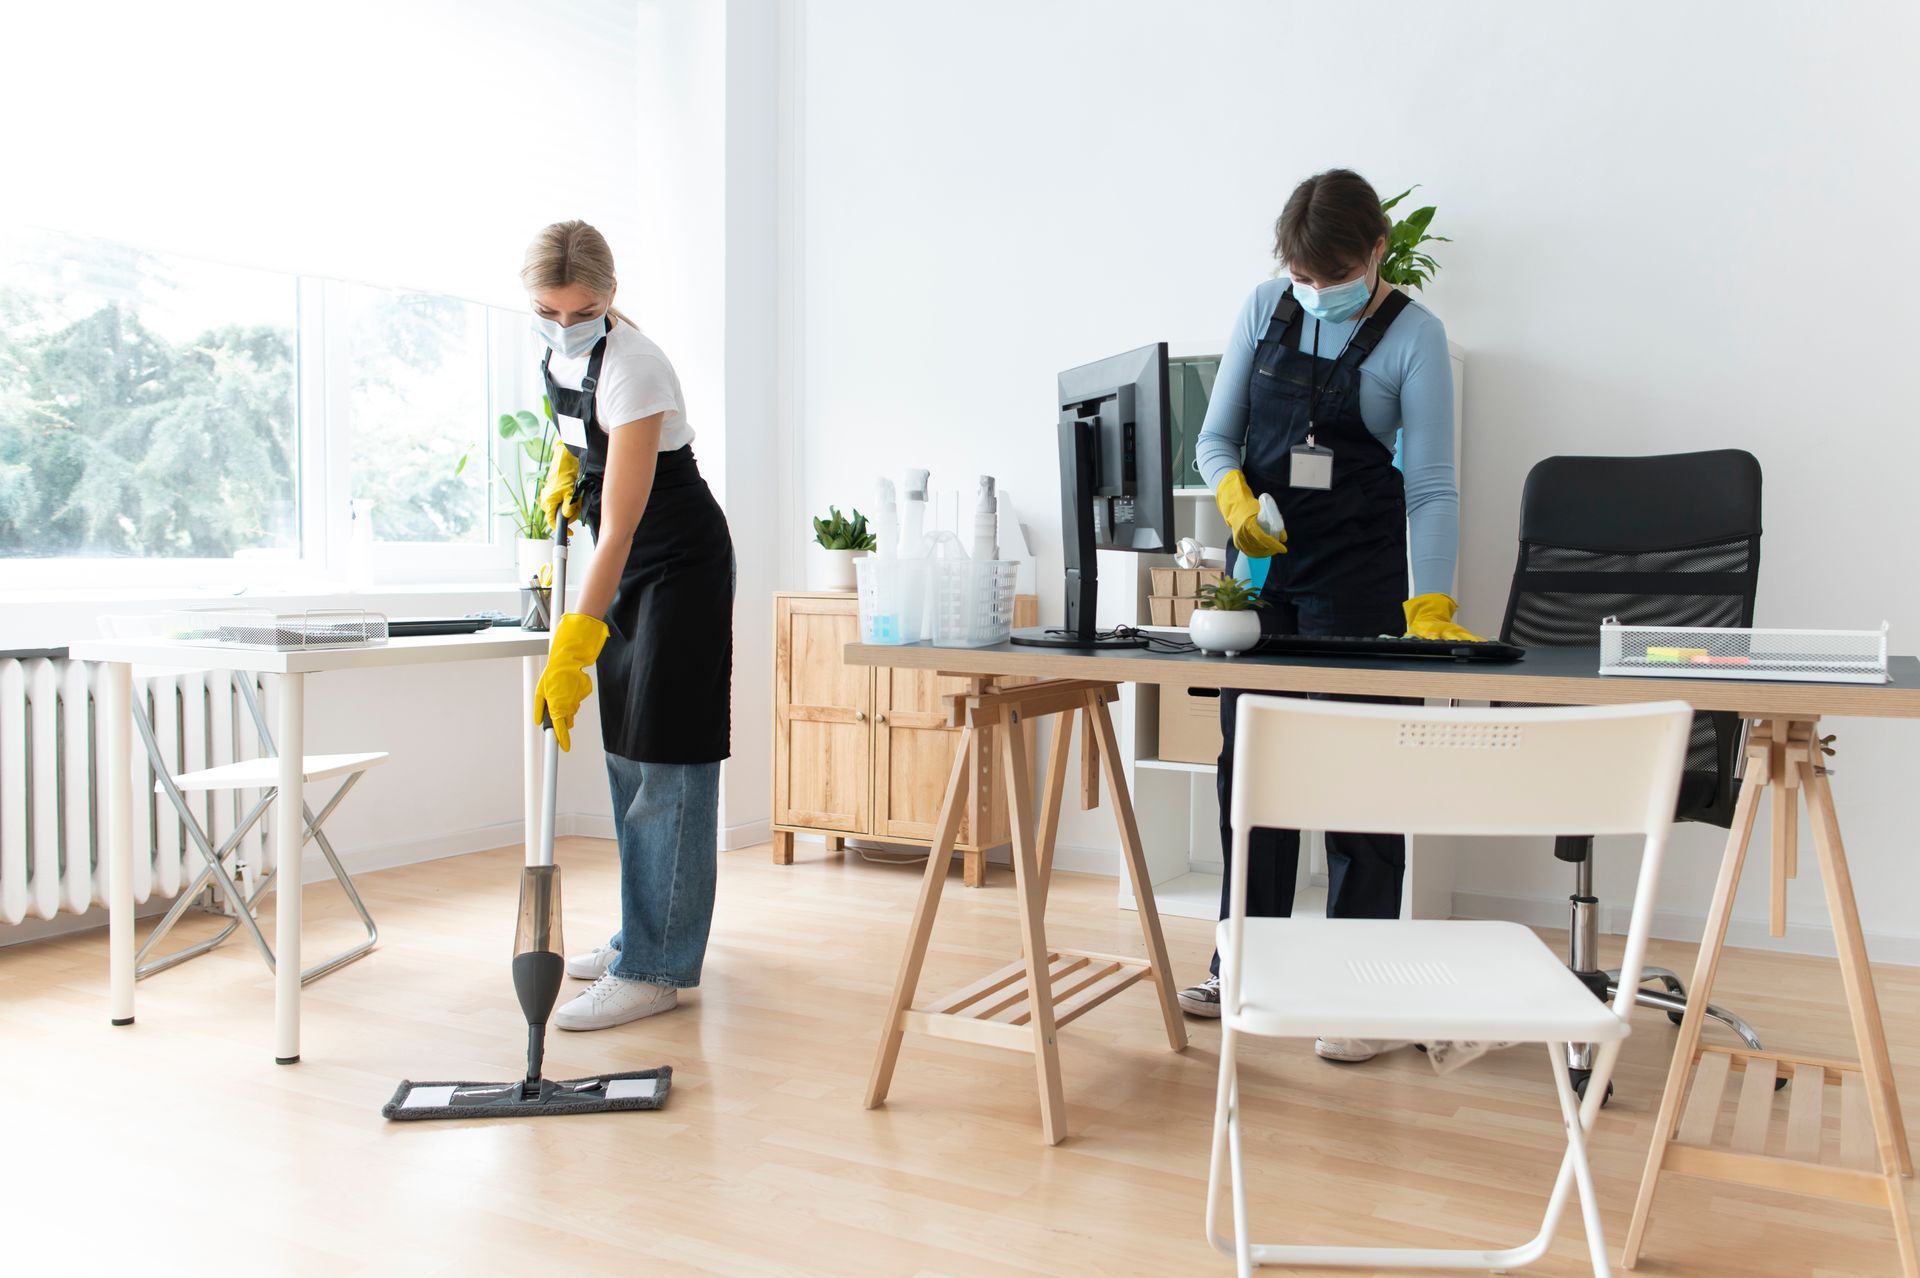 people-taking-care-office-cleaning